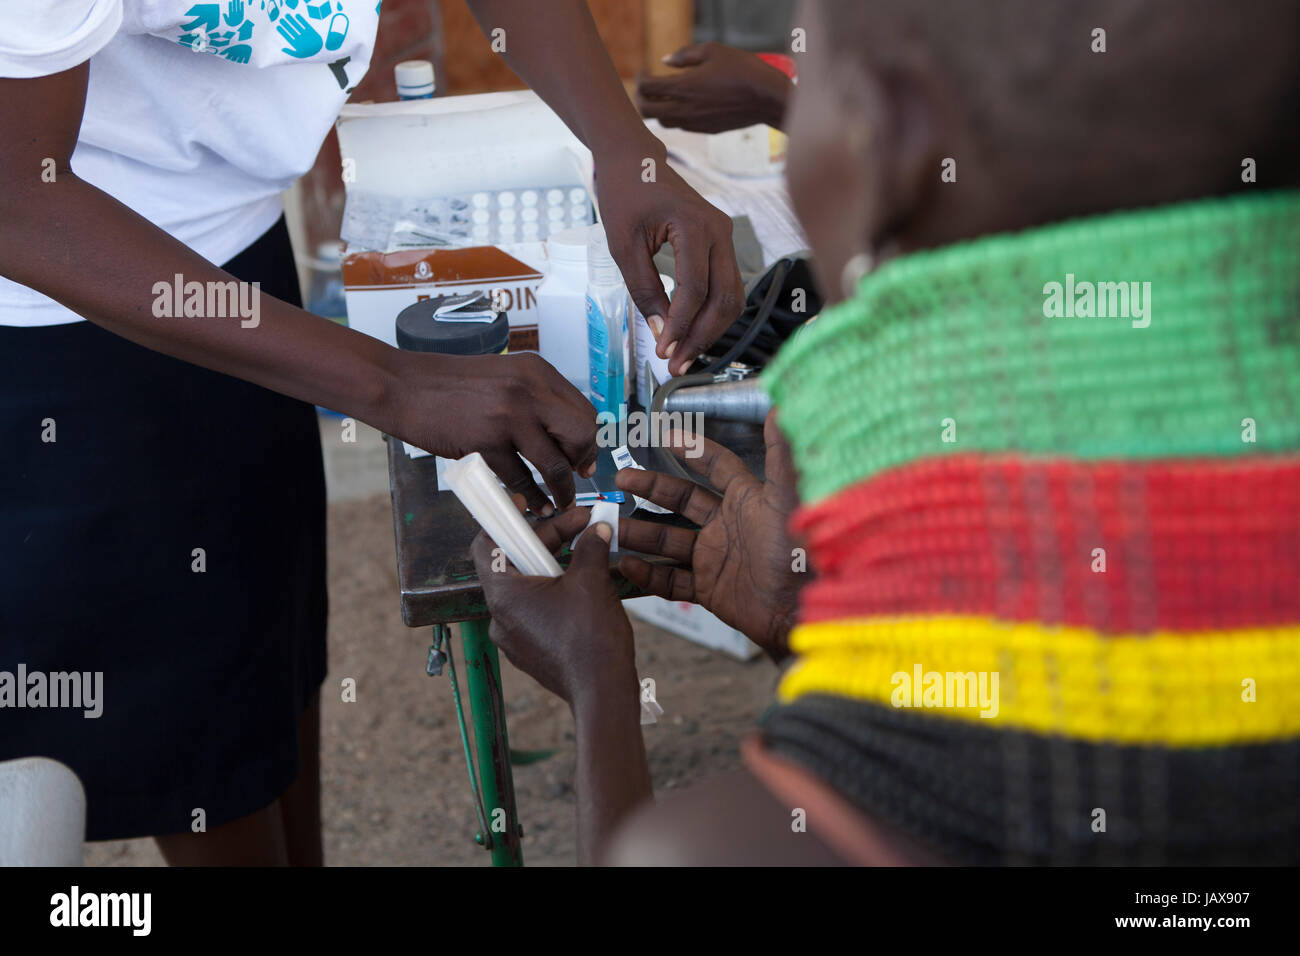 A woman attends a health clinic, rural Kenya, Africa. Stock Photo